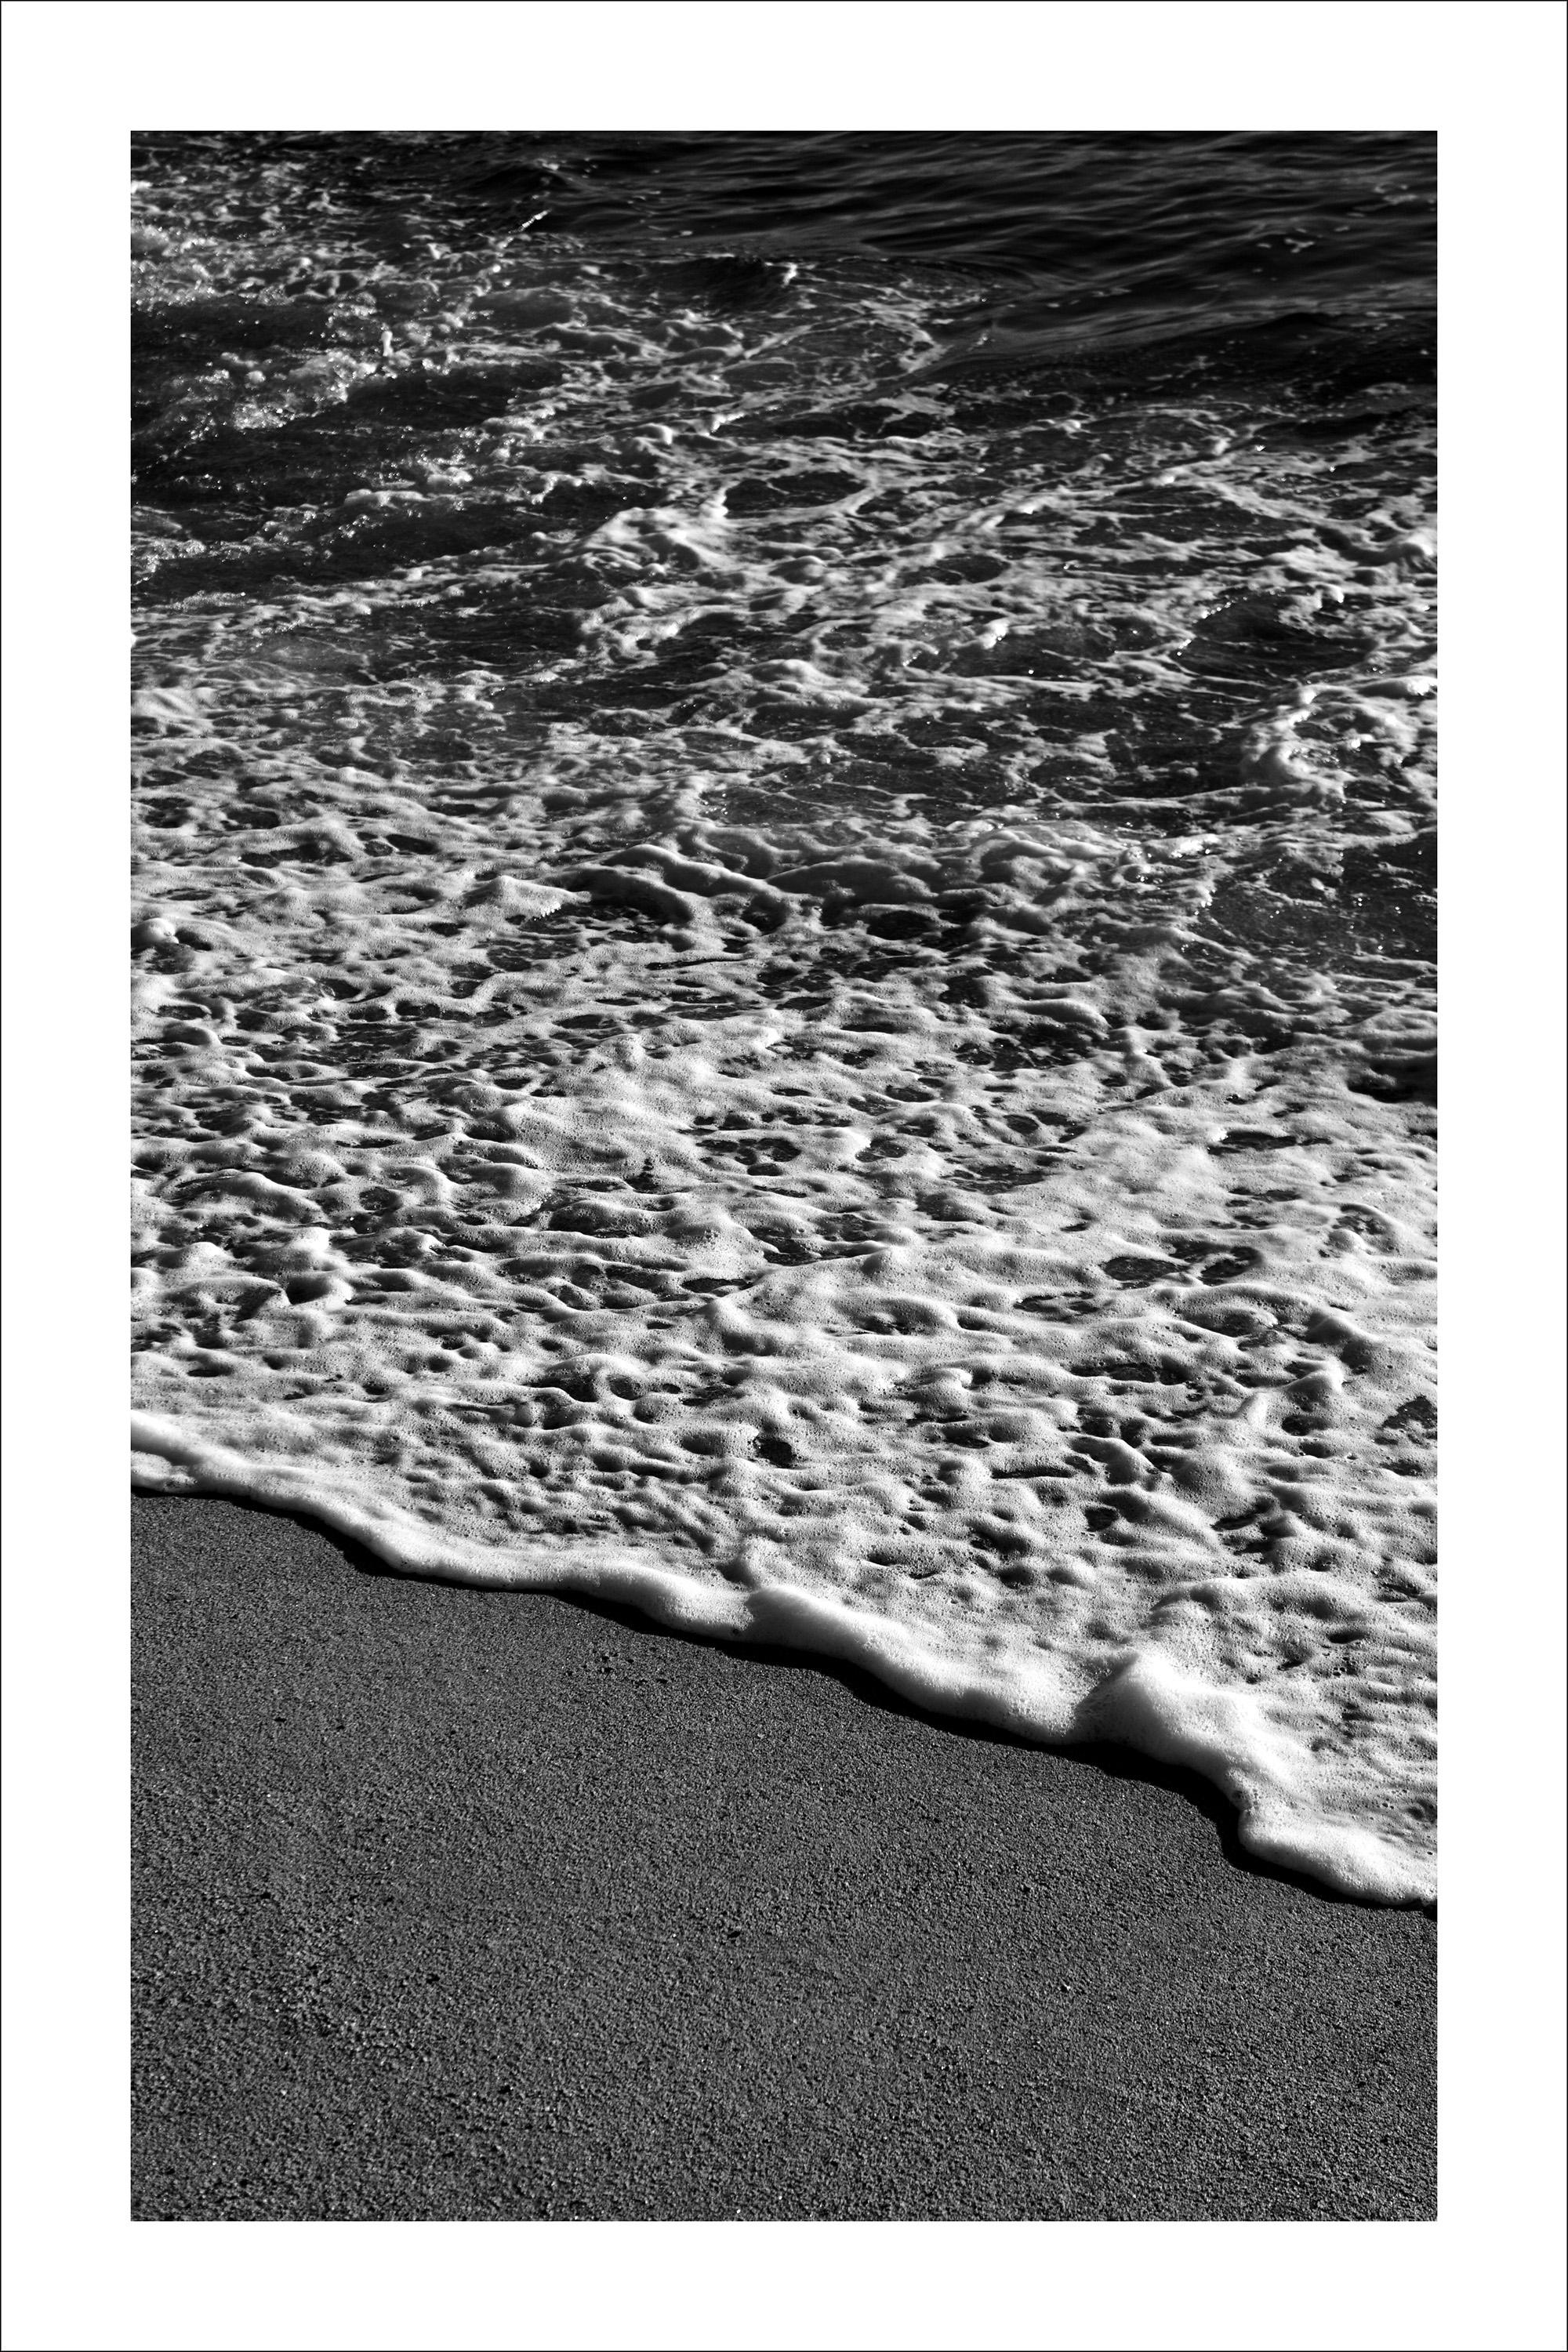 Kind of Cyan Landscape Photograph - Vertical Morning Seashore, Large Black and White Seascape Giclée, Sugimoto Style